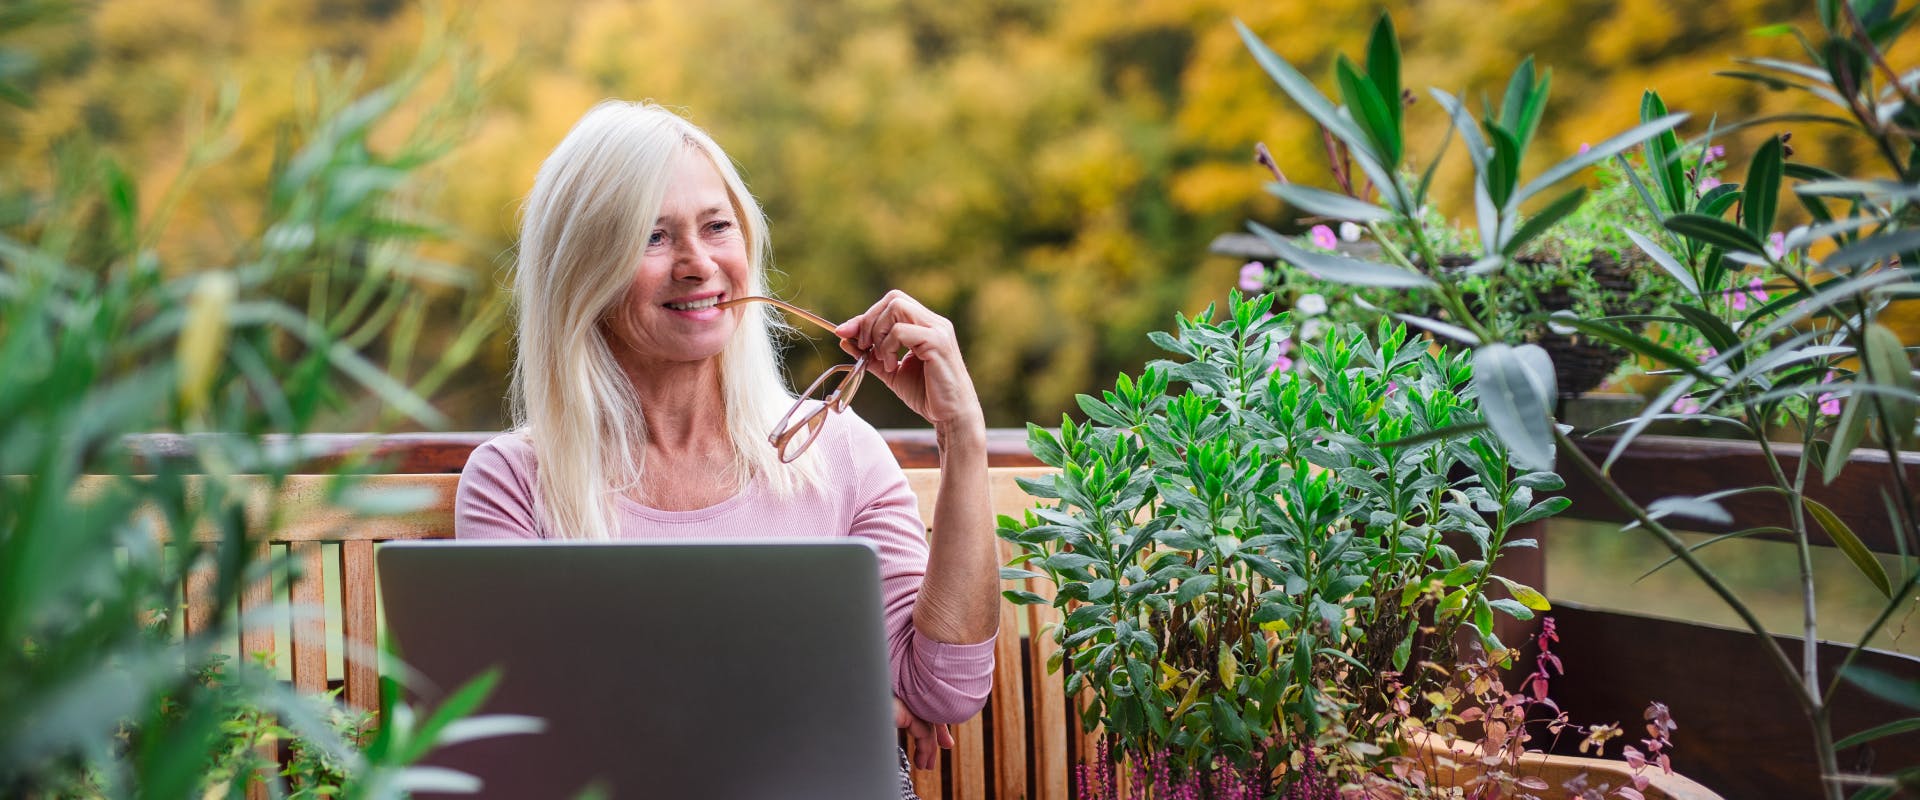 a woman sat on a wooden bench surrounded by shrubs with an open laptop on her lap in a rural area